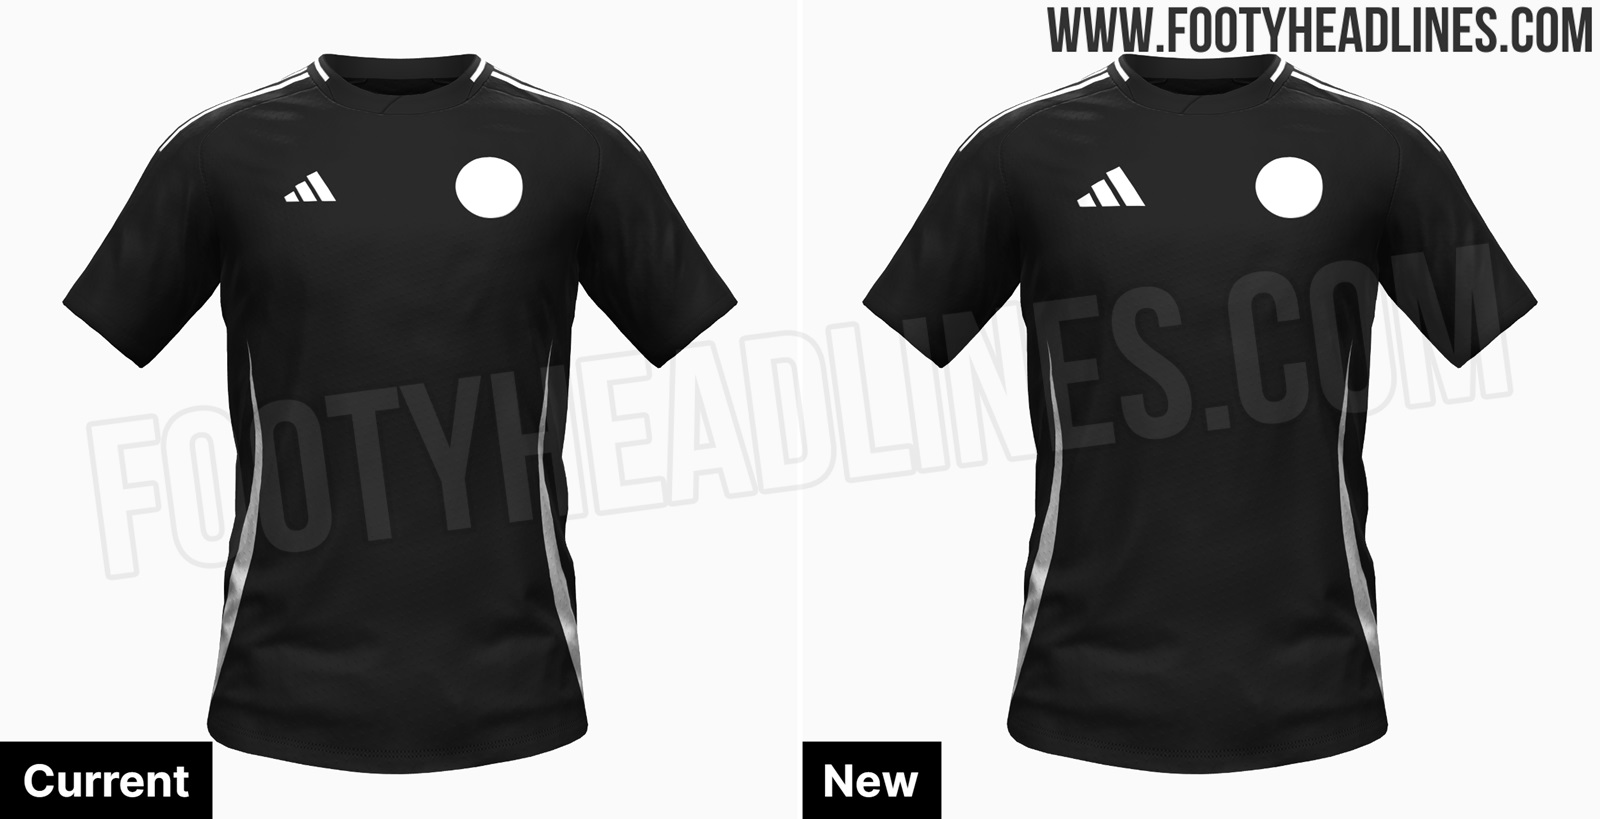 Exclusive: Adidas to Introduce Significantly Enlarged Logo on Football Kits  - Footy Headlines